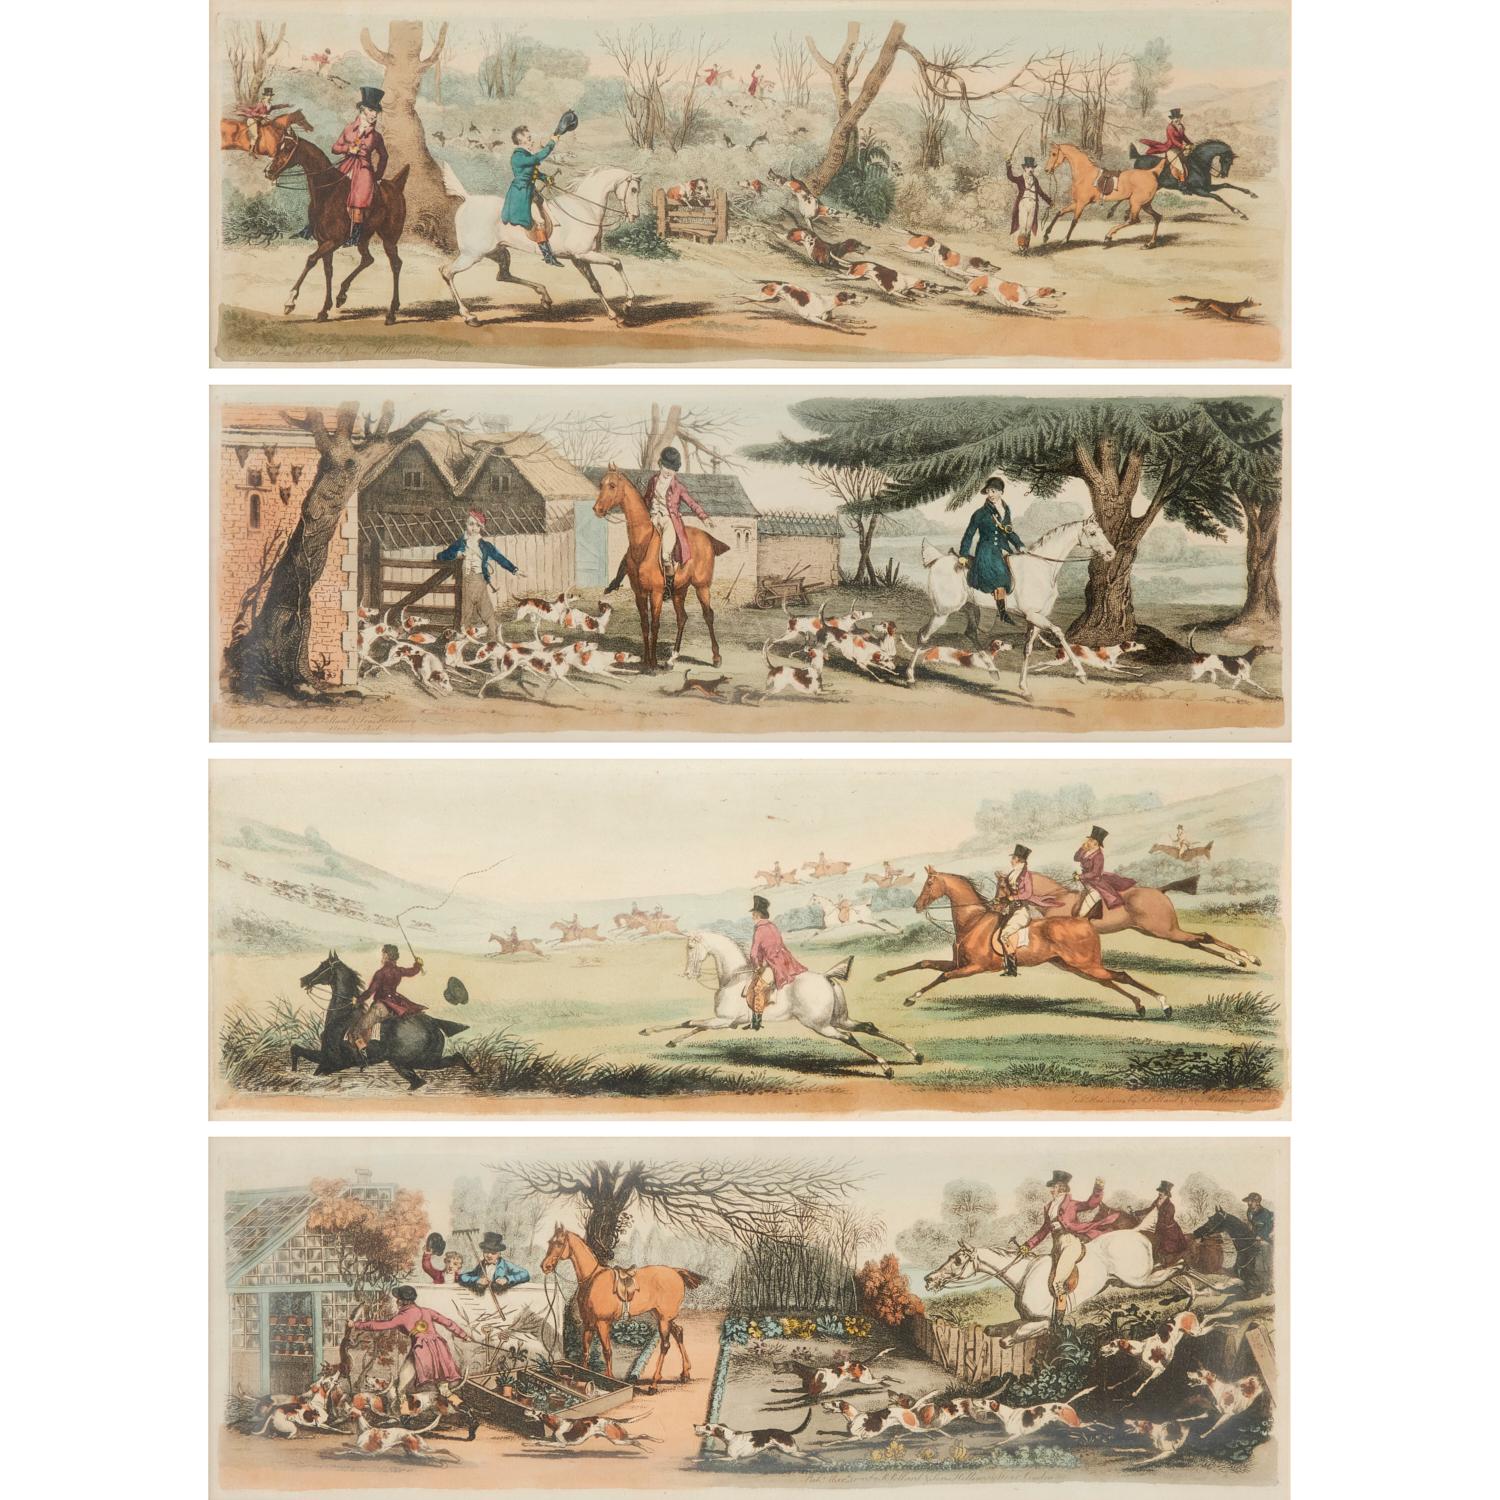 British, R. Pollard & Sons, a set of (4) hand-colored engravings, dated 1822, of four fox hunting scenes, each identically matted and framed under glass. The scenes represent different stages of a hunt from releasing the hounds, galloping through